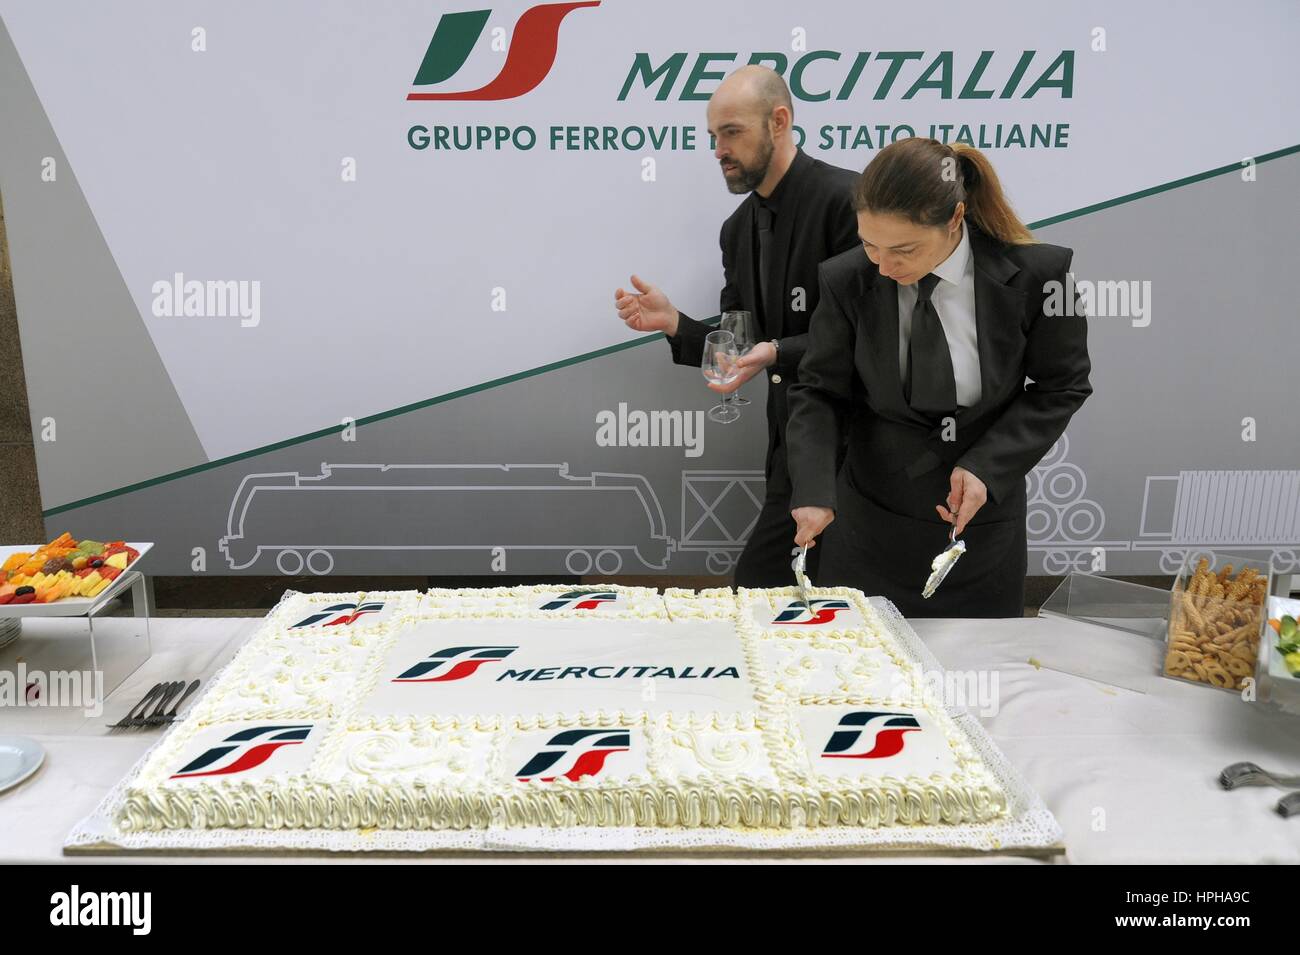 Milan, february 2017 - presentation of the new Polo Mercitalia, grouping of the Italian FS Group companies operating in the business of freight transport and logistics Stock Photo